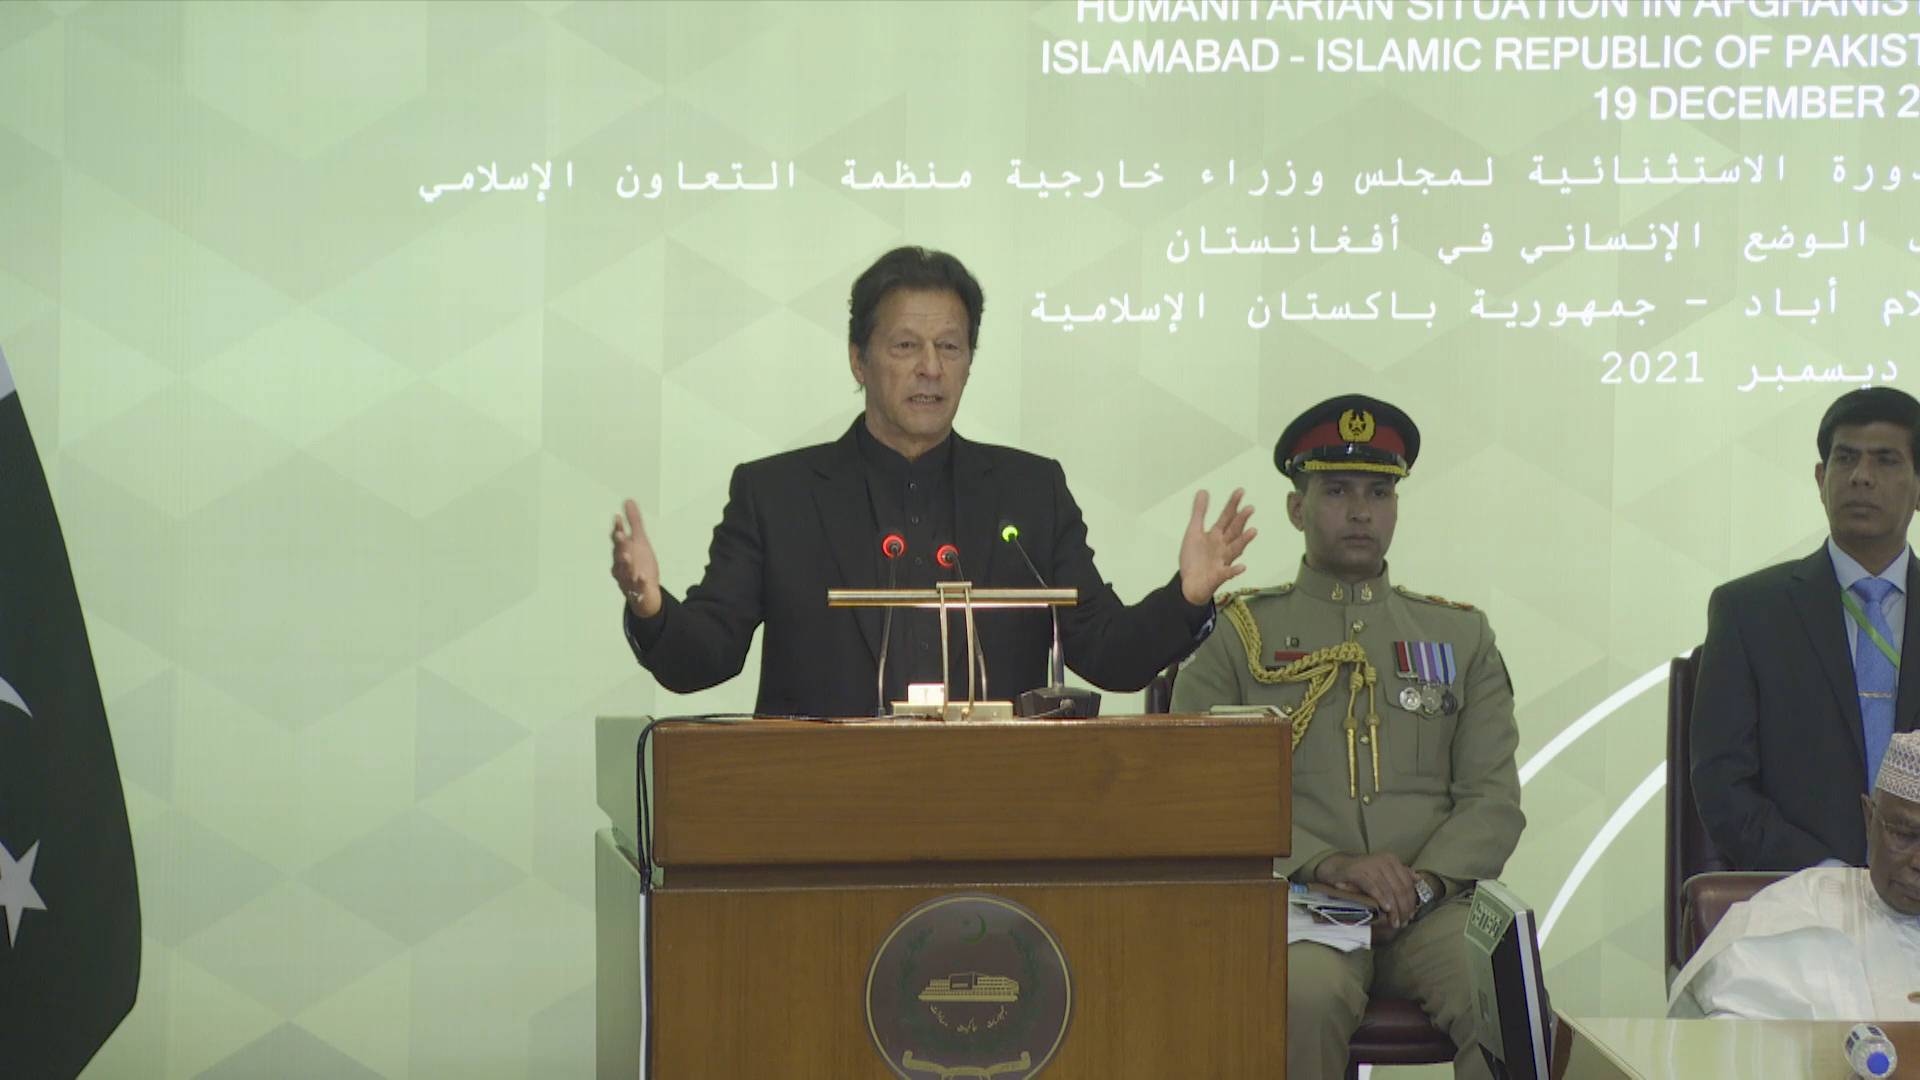 GLOBALink | Pakistani PM calls for int'l aid to Afghanistan to avoid crisis